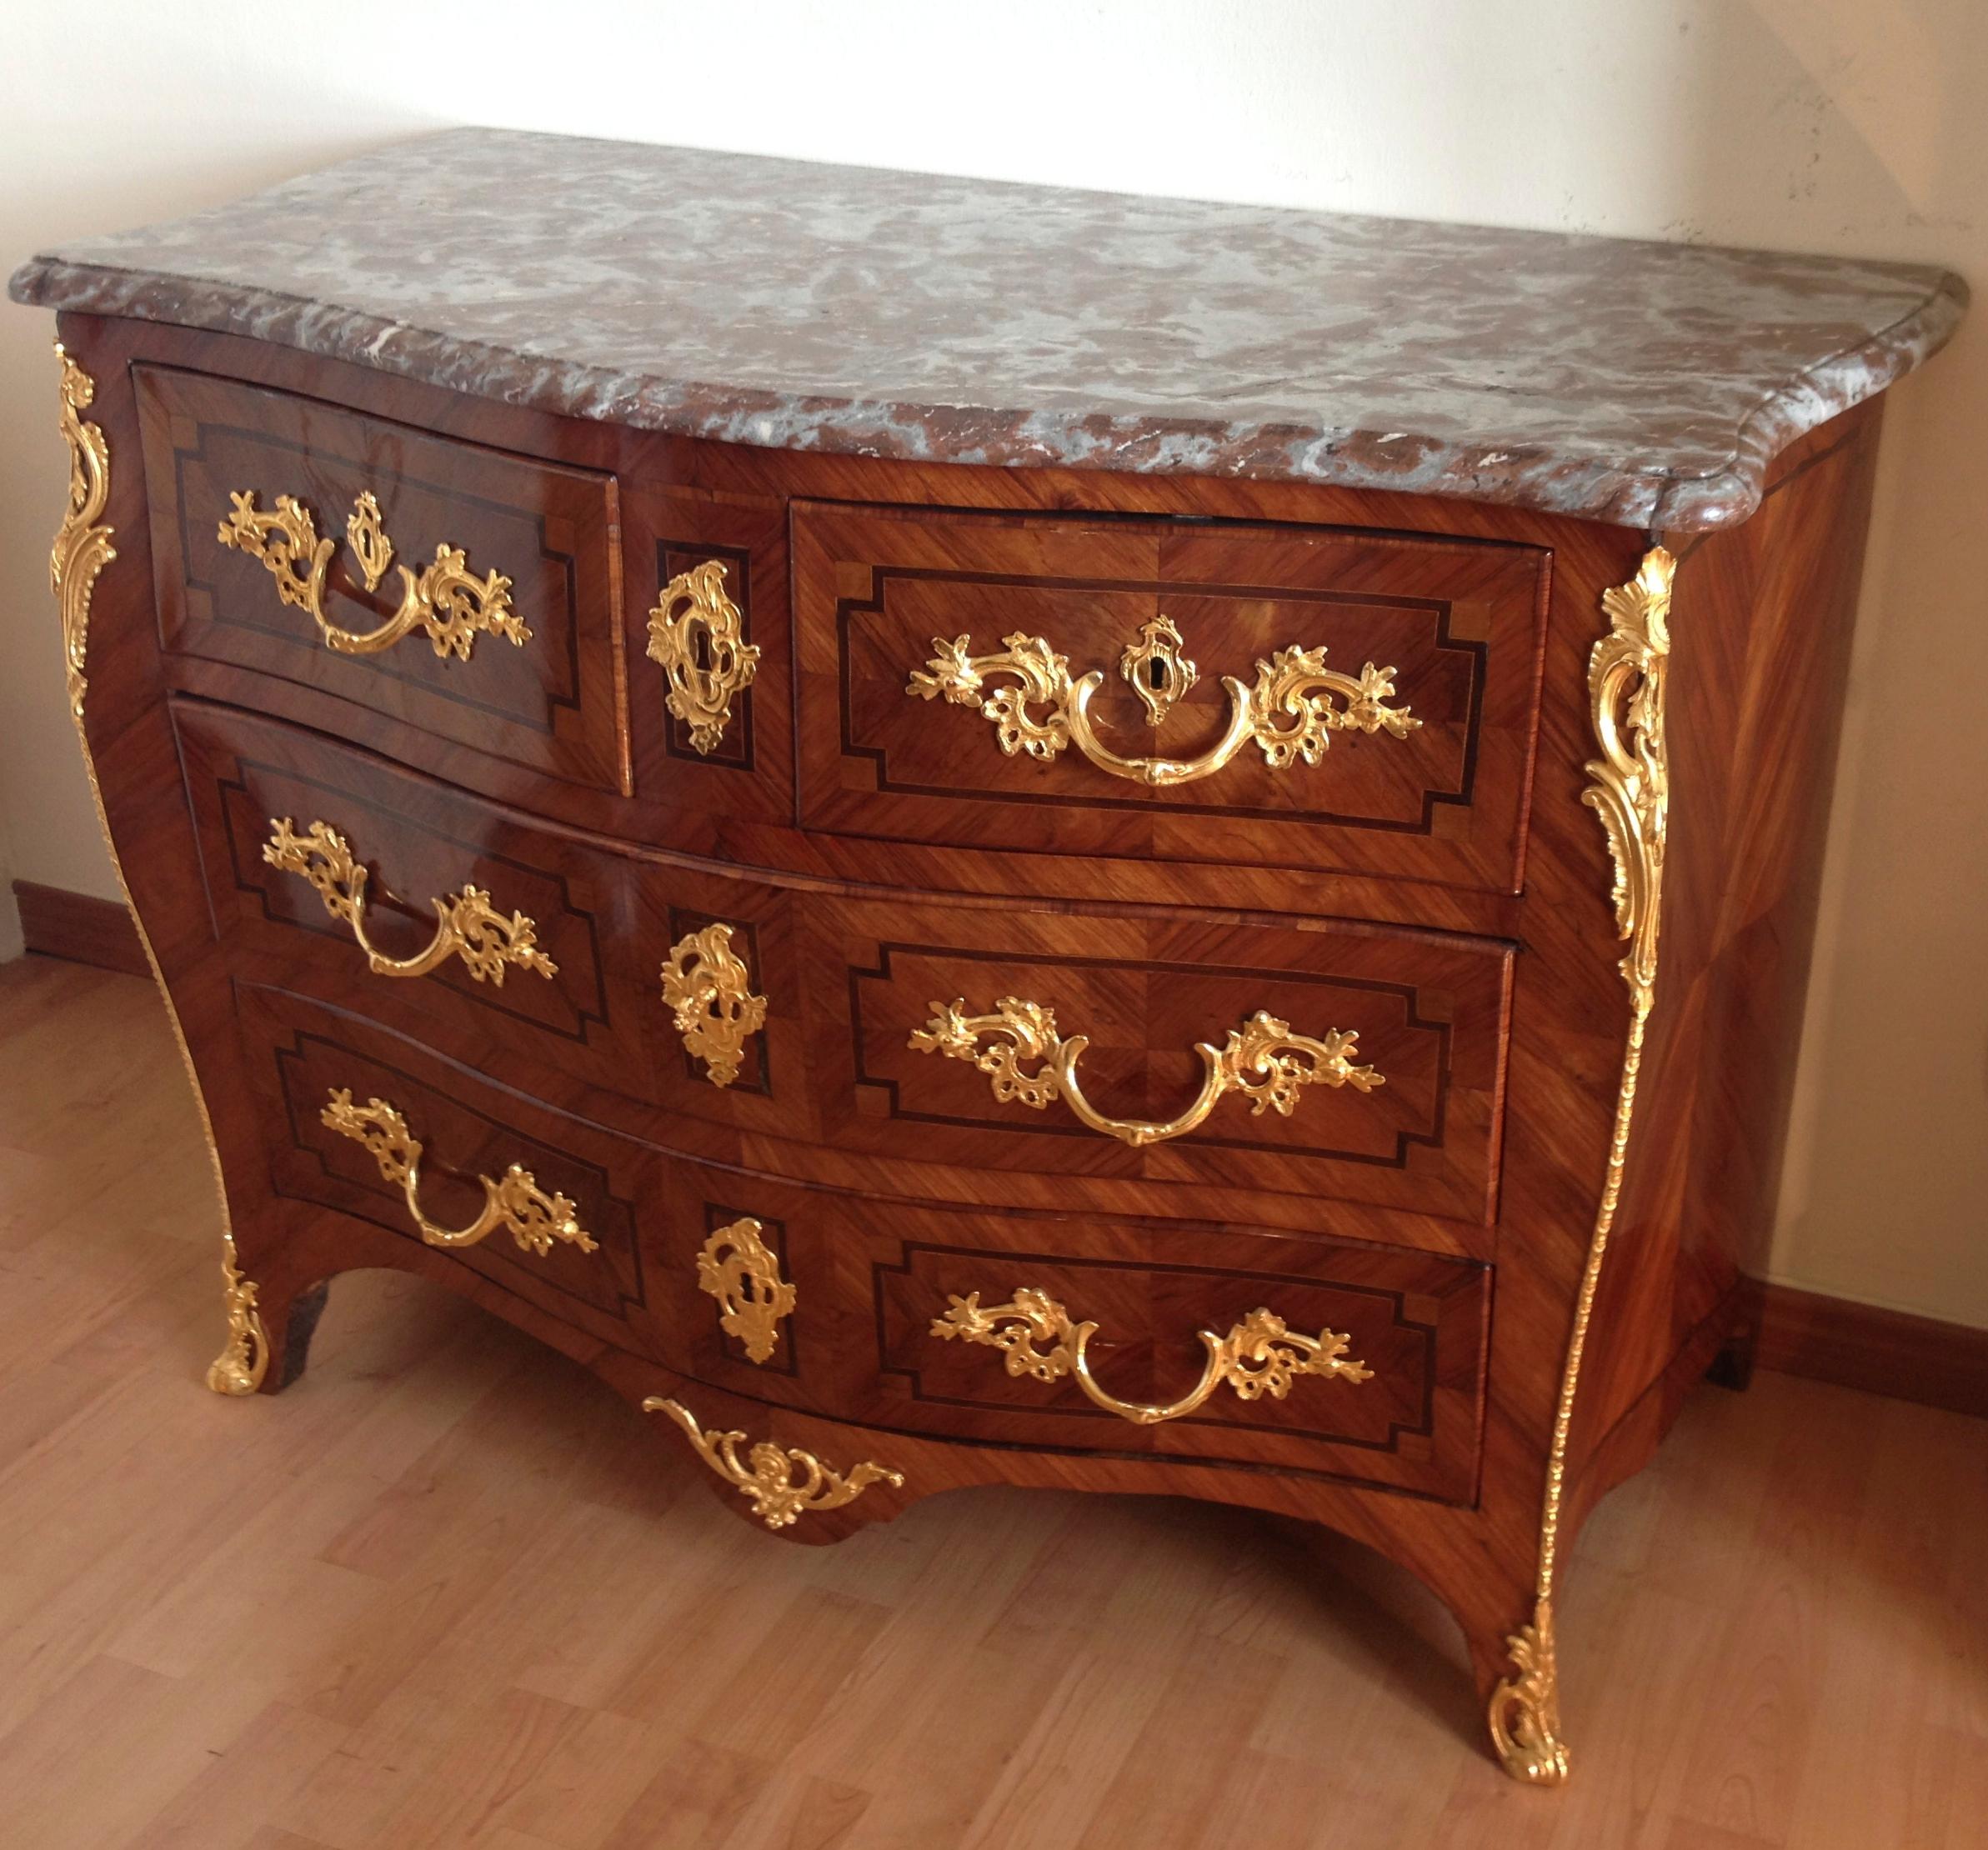 Important and very fine French Louis XV style commode or chest of drawers stamped 'P. Roussel' (Pierre Roussel 1723-June 7, 1782 ). This commode with its three rows of drawers bears the maker's stamp of Pierre Roussel and is of characteristic rococo